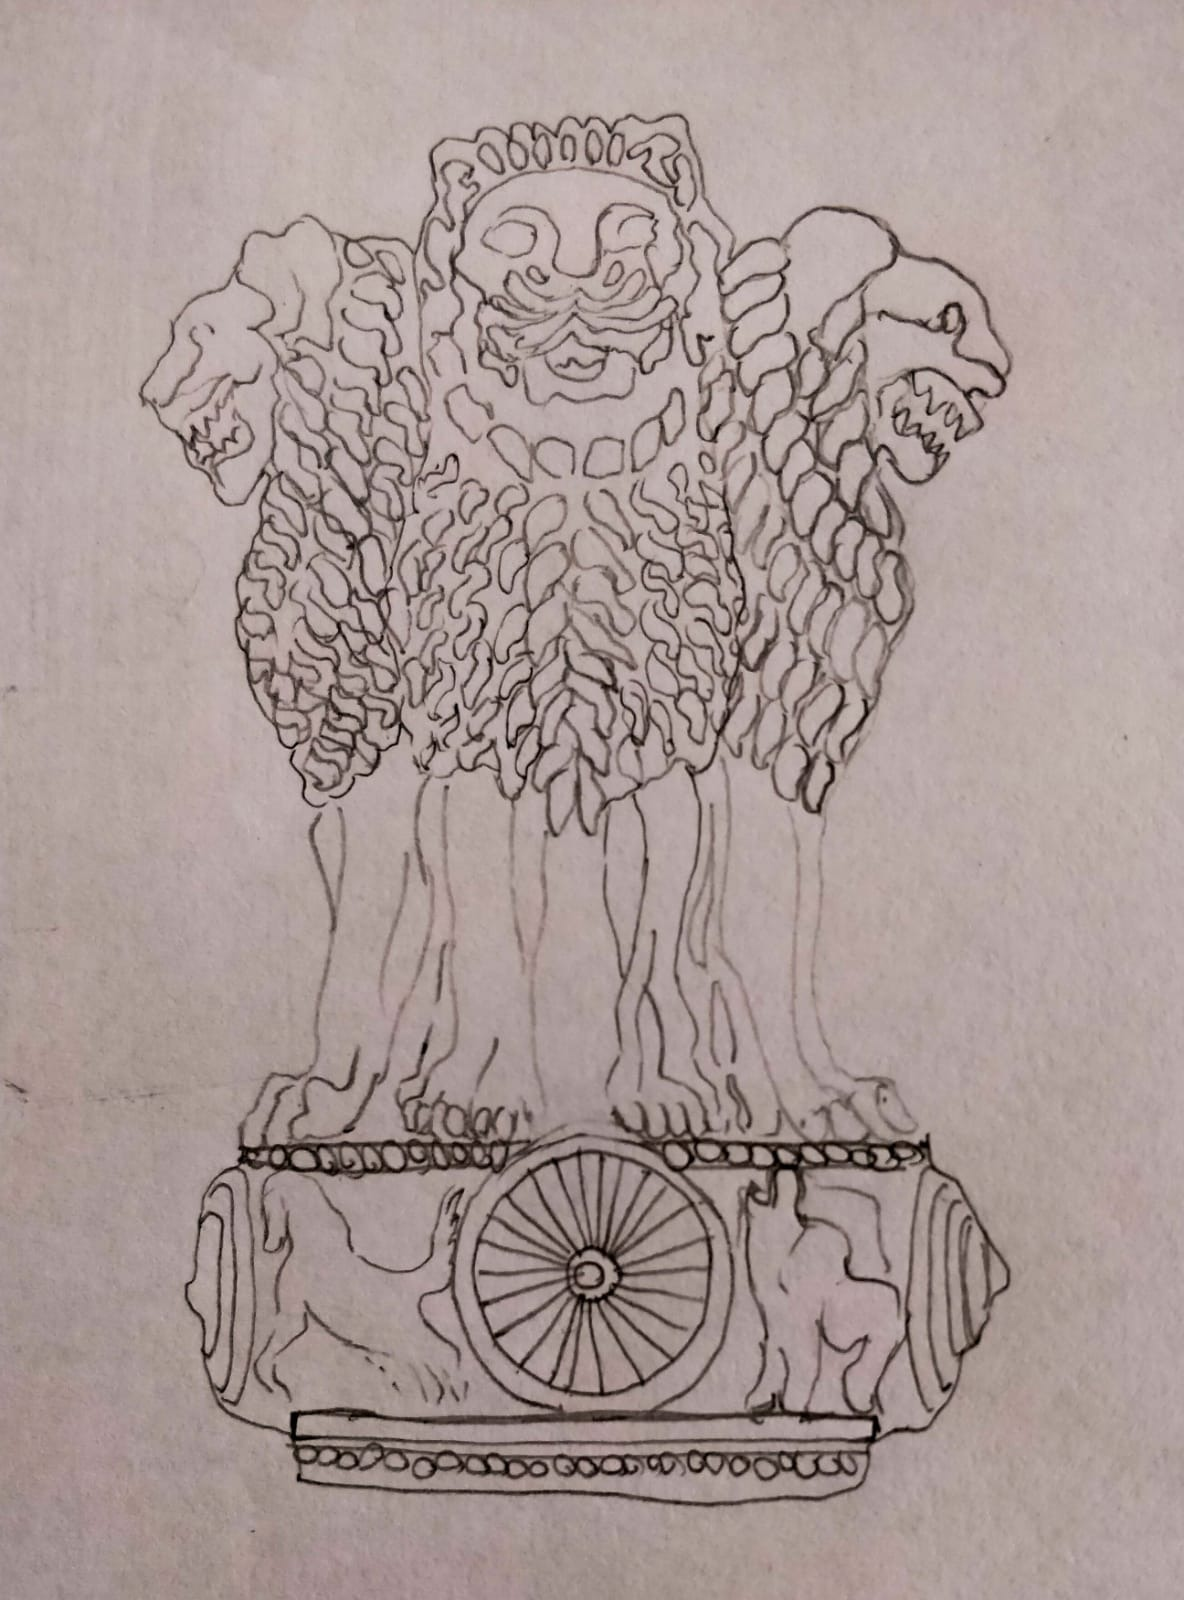 Coat arms manipur is a indian region emblem Vector Image